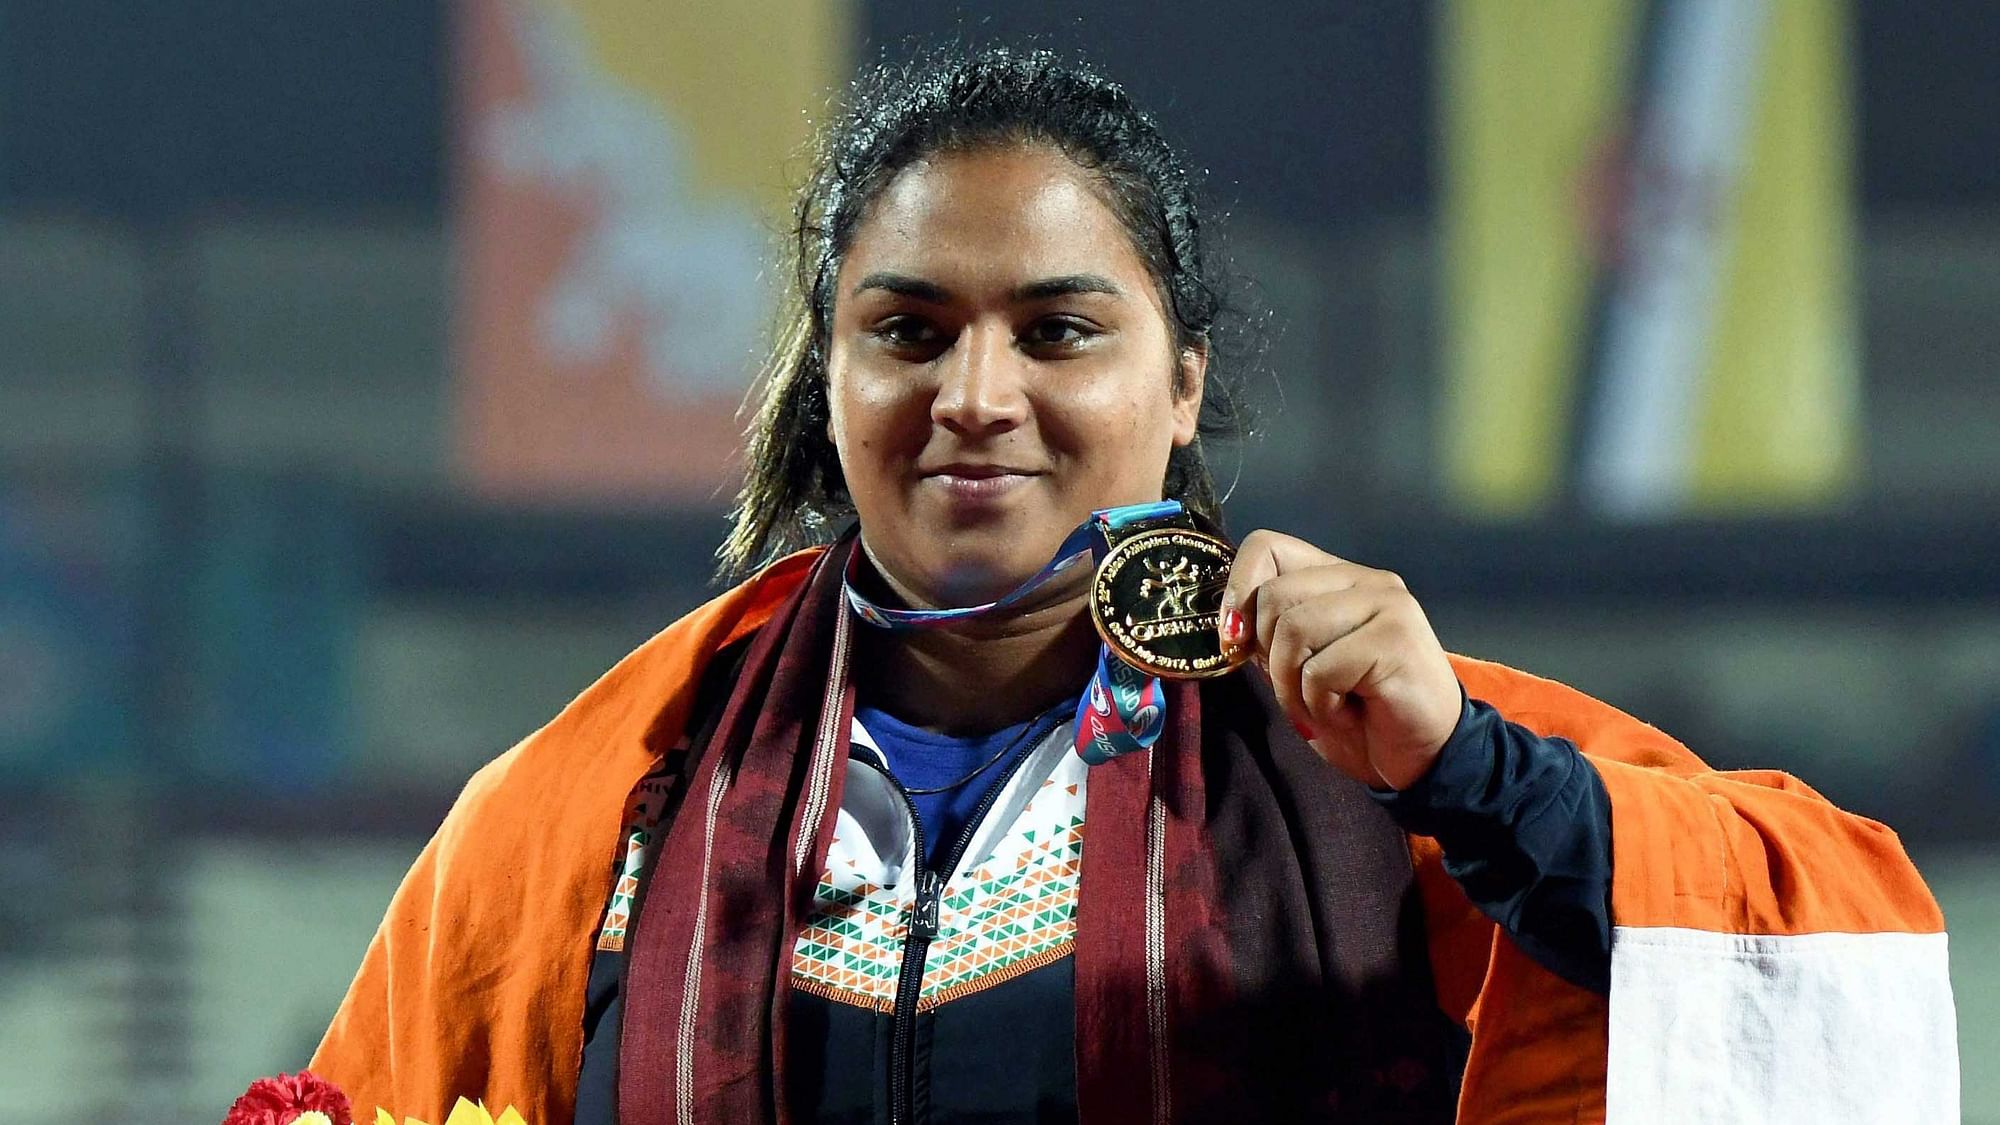 Manpreet Kaur shows her medal during the presentation ceremony of the Women’s Shot Put event during the 22nd Asian Athletics Championships in Bhubaneshwar